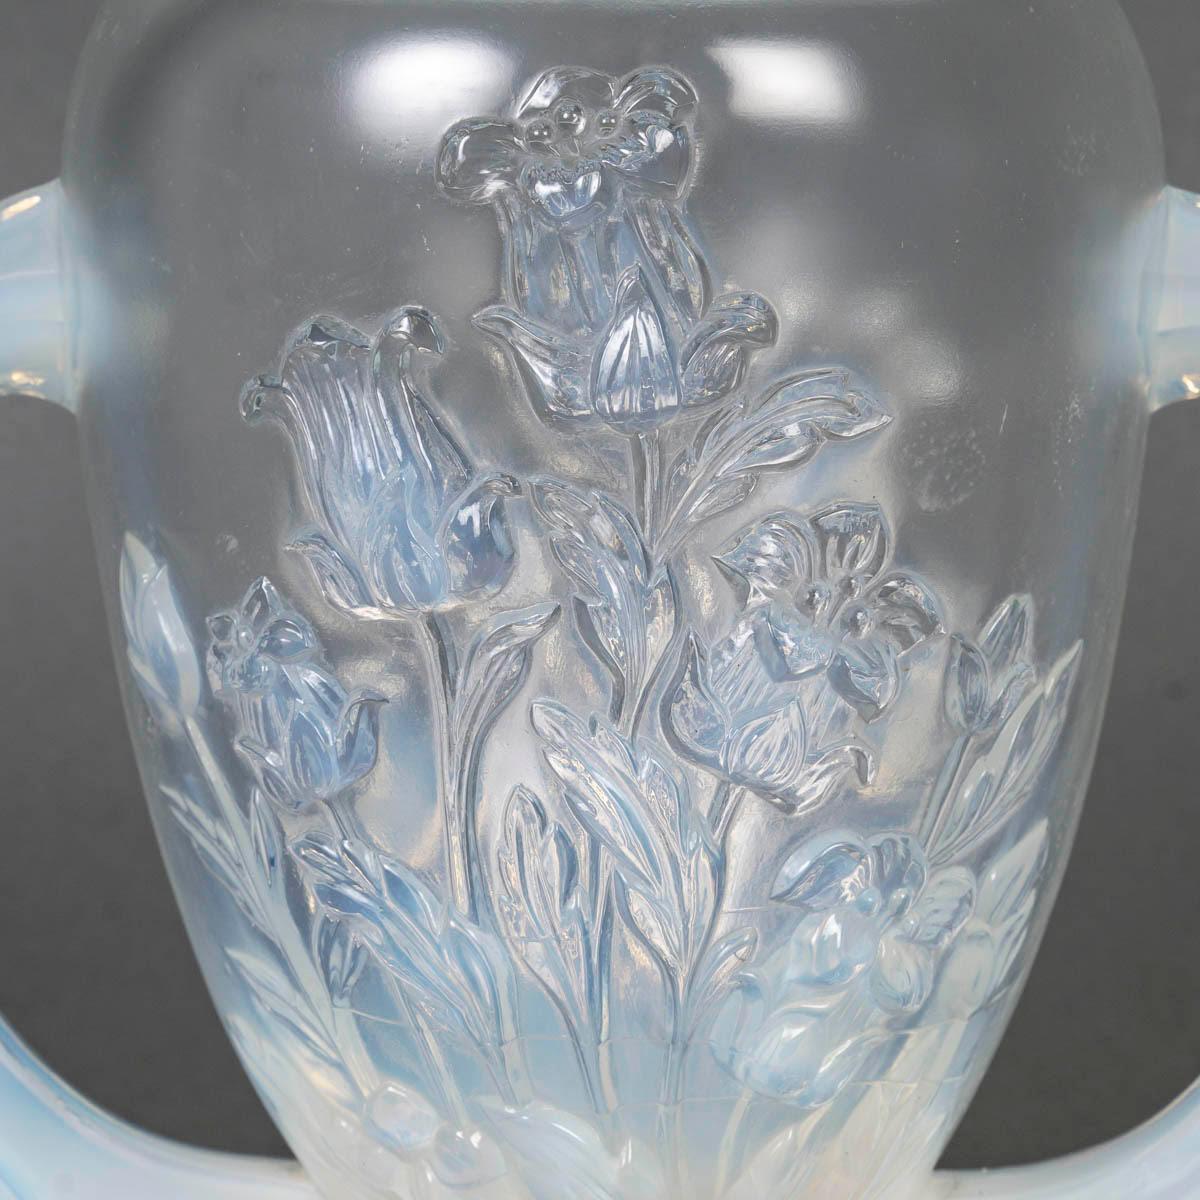 Opalescent glass vase from Verlys, early 20th century.

A Verlys opalescent glass vase on a shower base, early 20th century.
H: 20cm, W: 25cm, D: 14cm